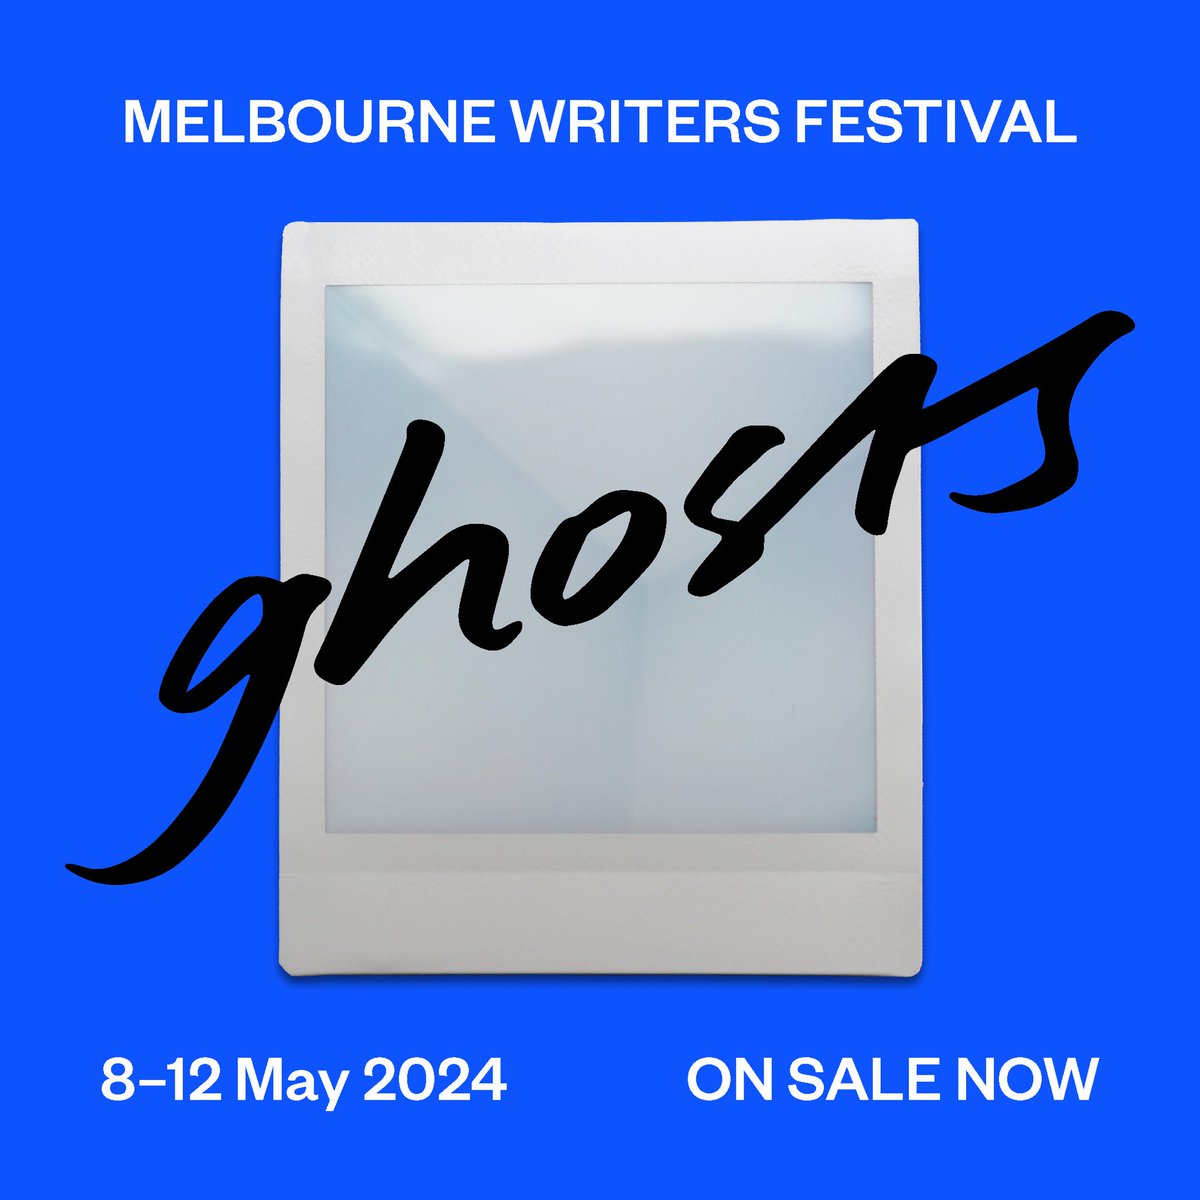 Melbourne Writers Festival returns with a packed literary line-up for 2024 Returning to venues across the CBD and surrounds from 6–12 May, the 2024 Festival gathers one of the largest literary line-ups seen in the city for some time. mwf.com.au